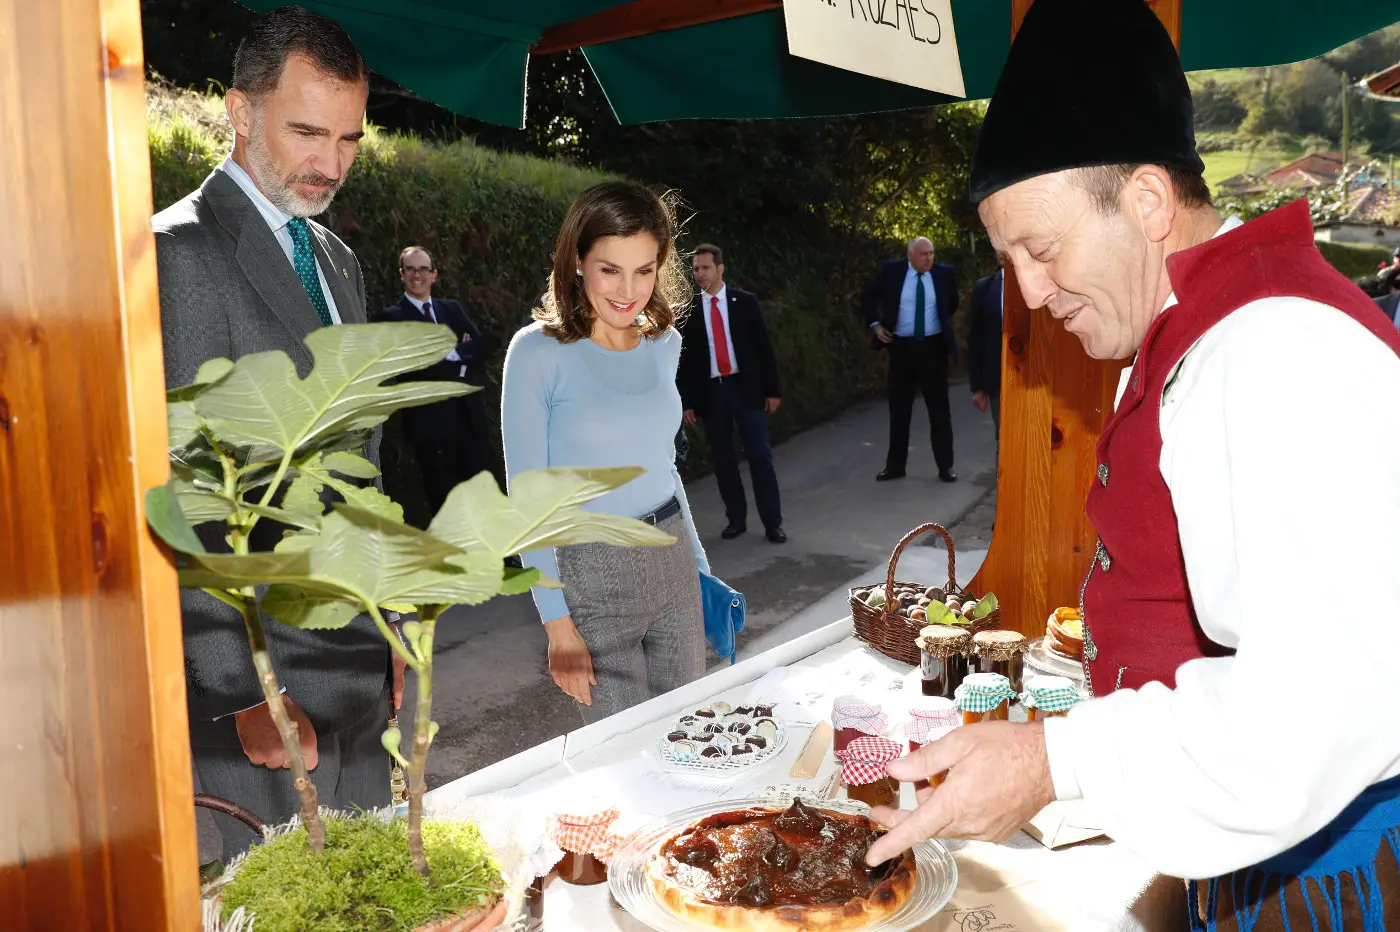 Queen Letizia ended visit to her home soil Oviedo on semi-professional note